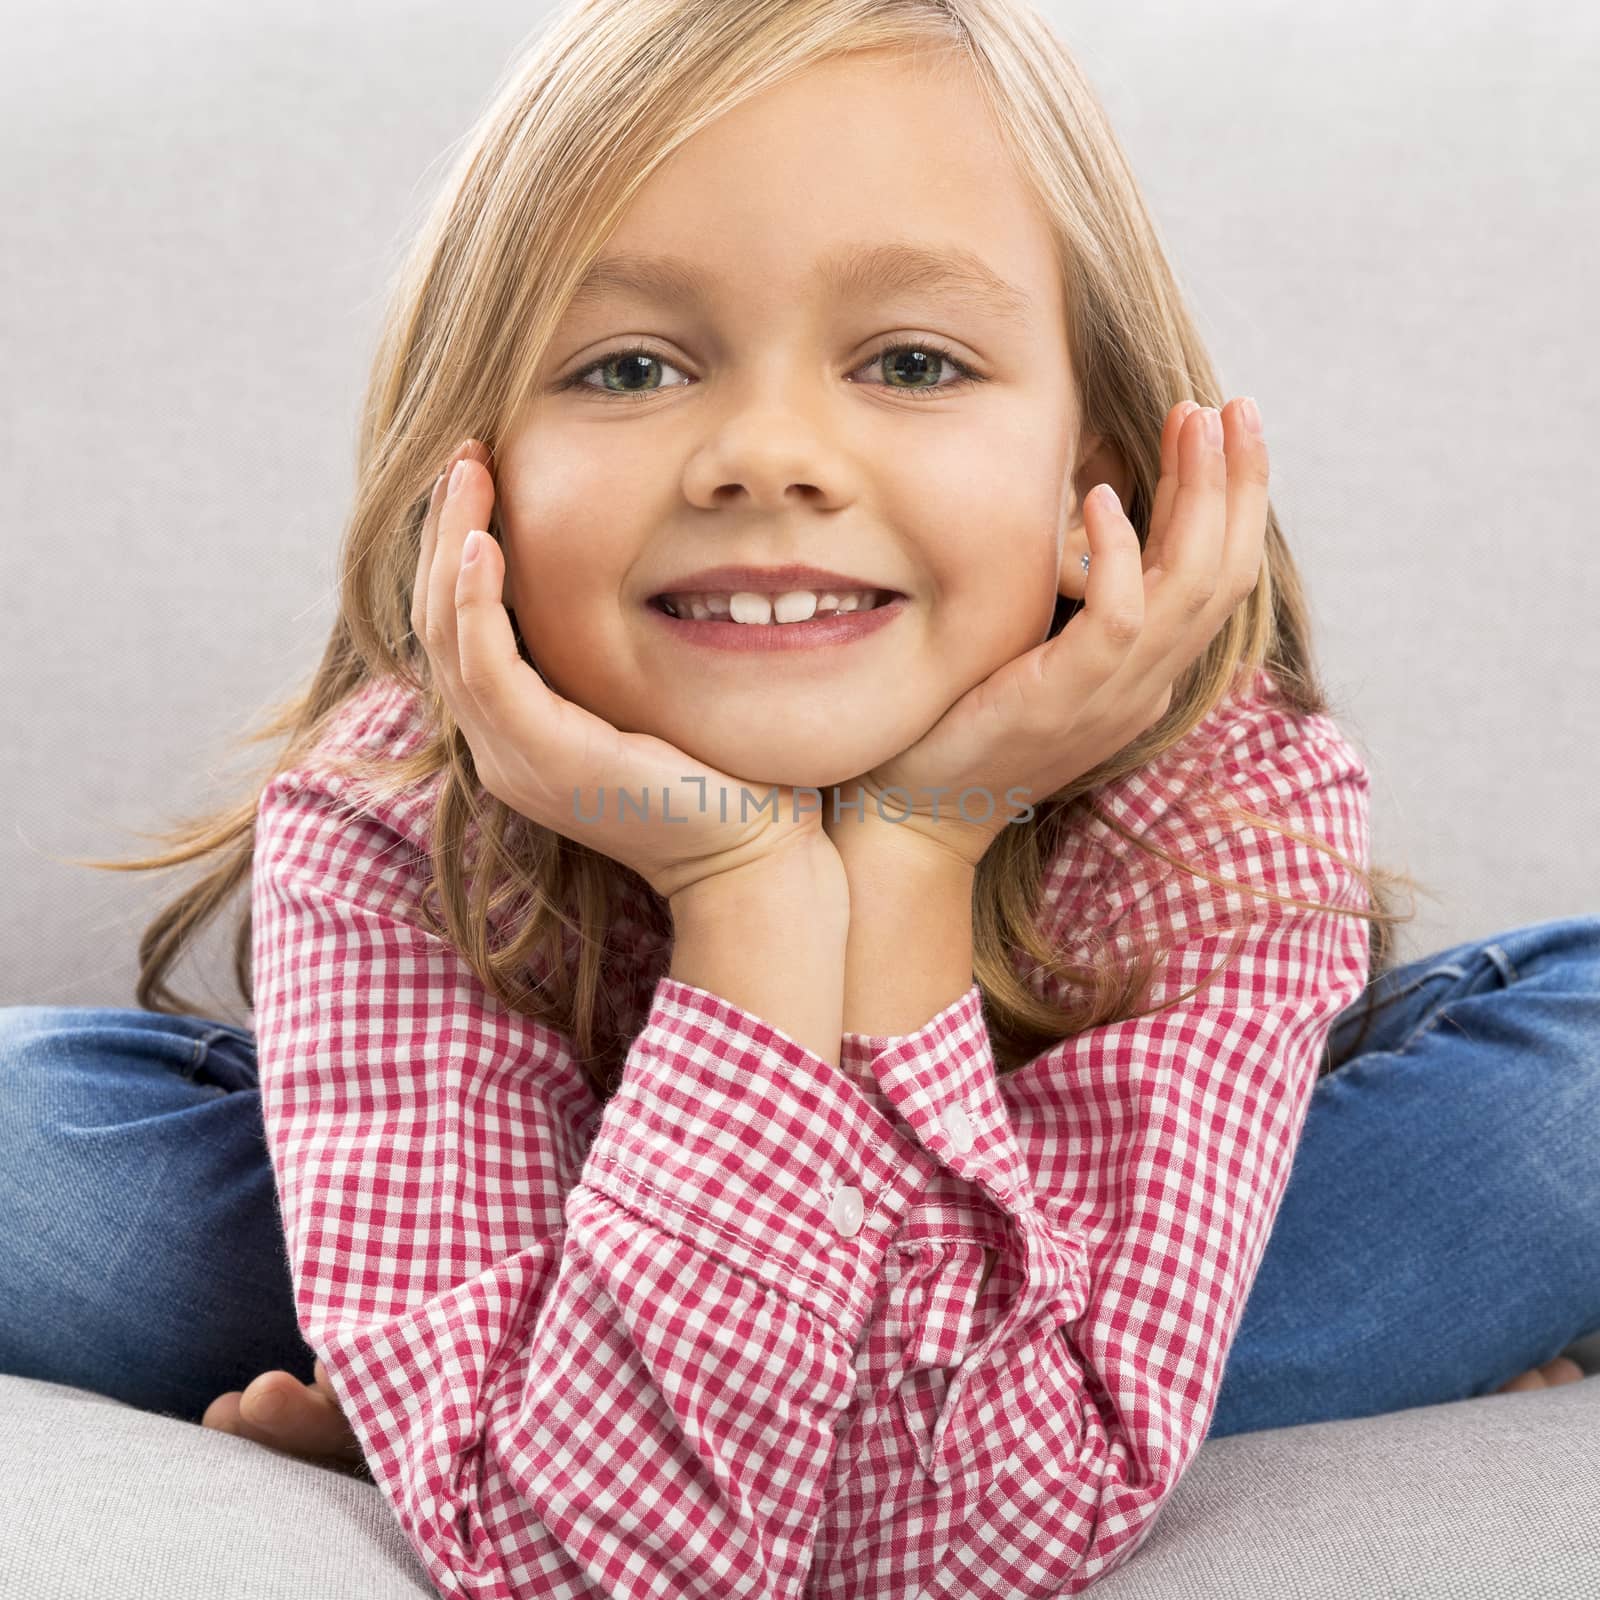 Little girl sitting on a couch and looking to the camera